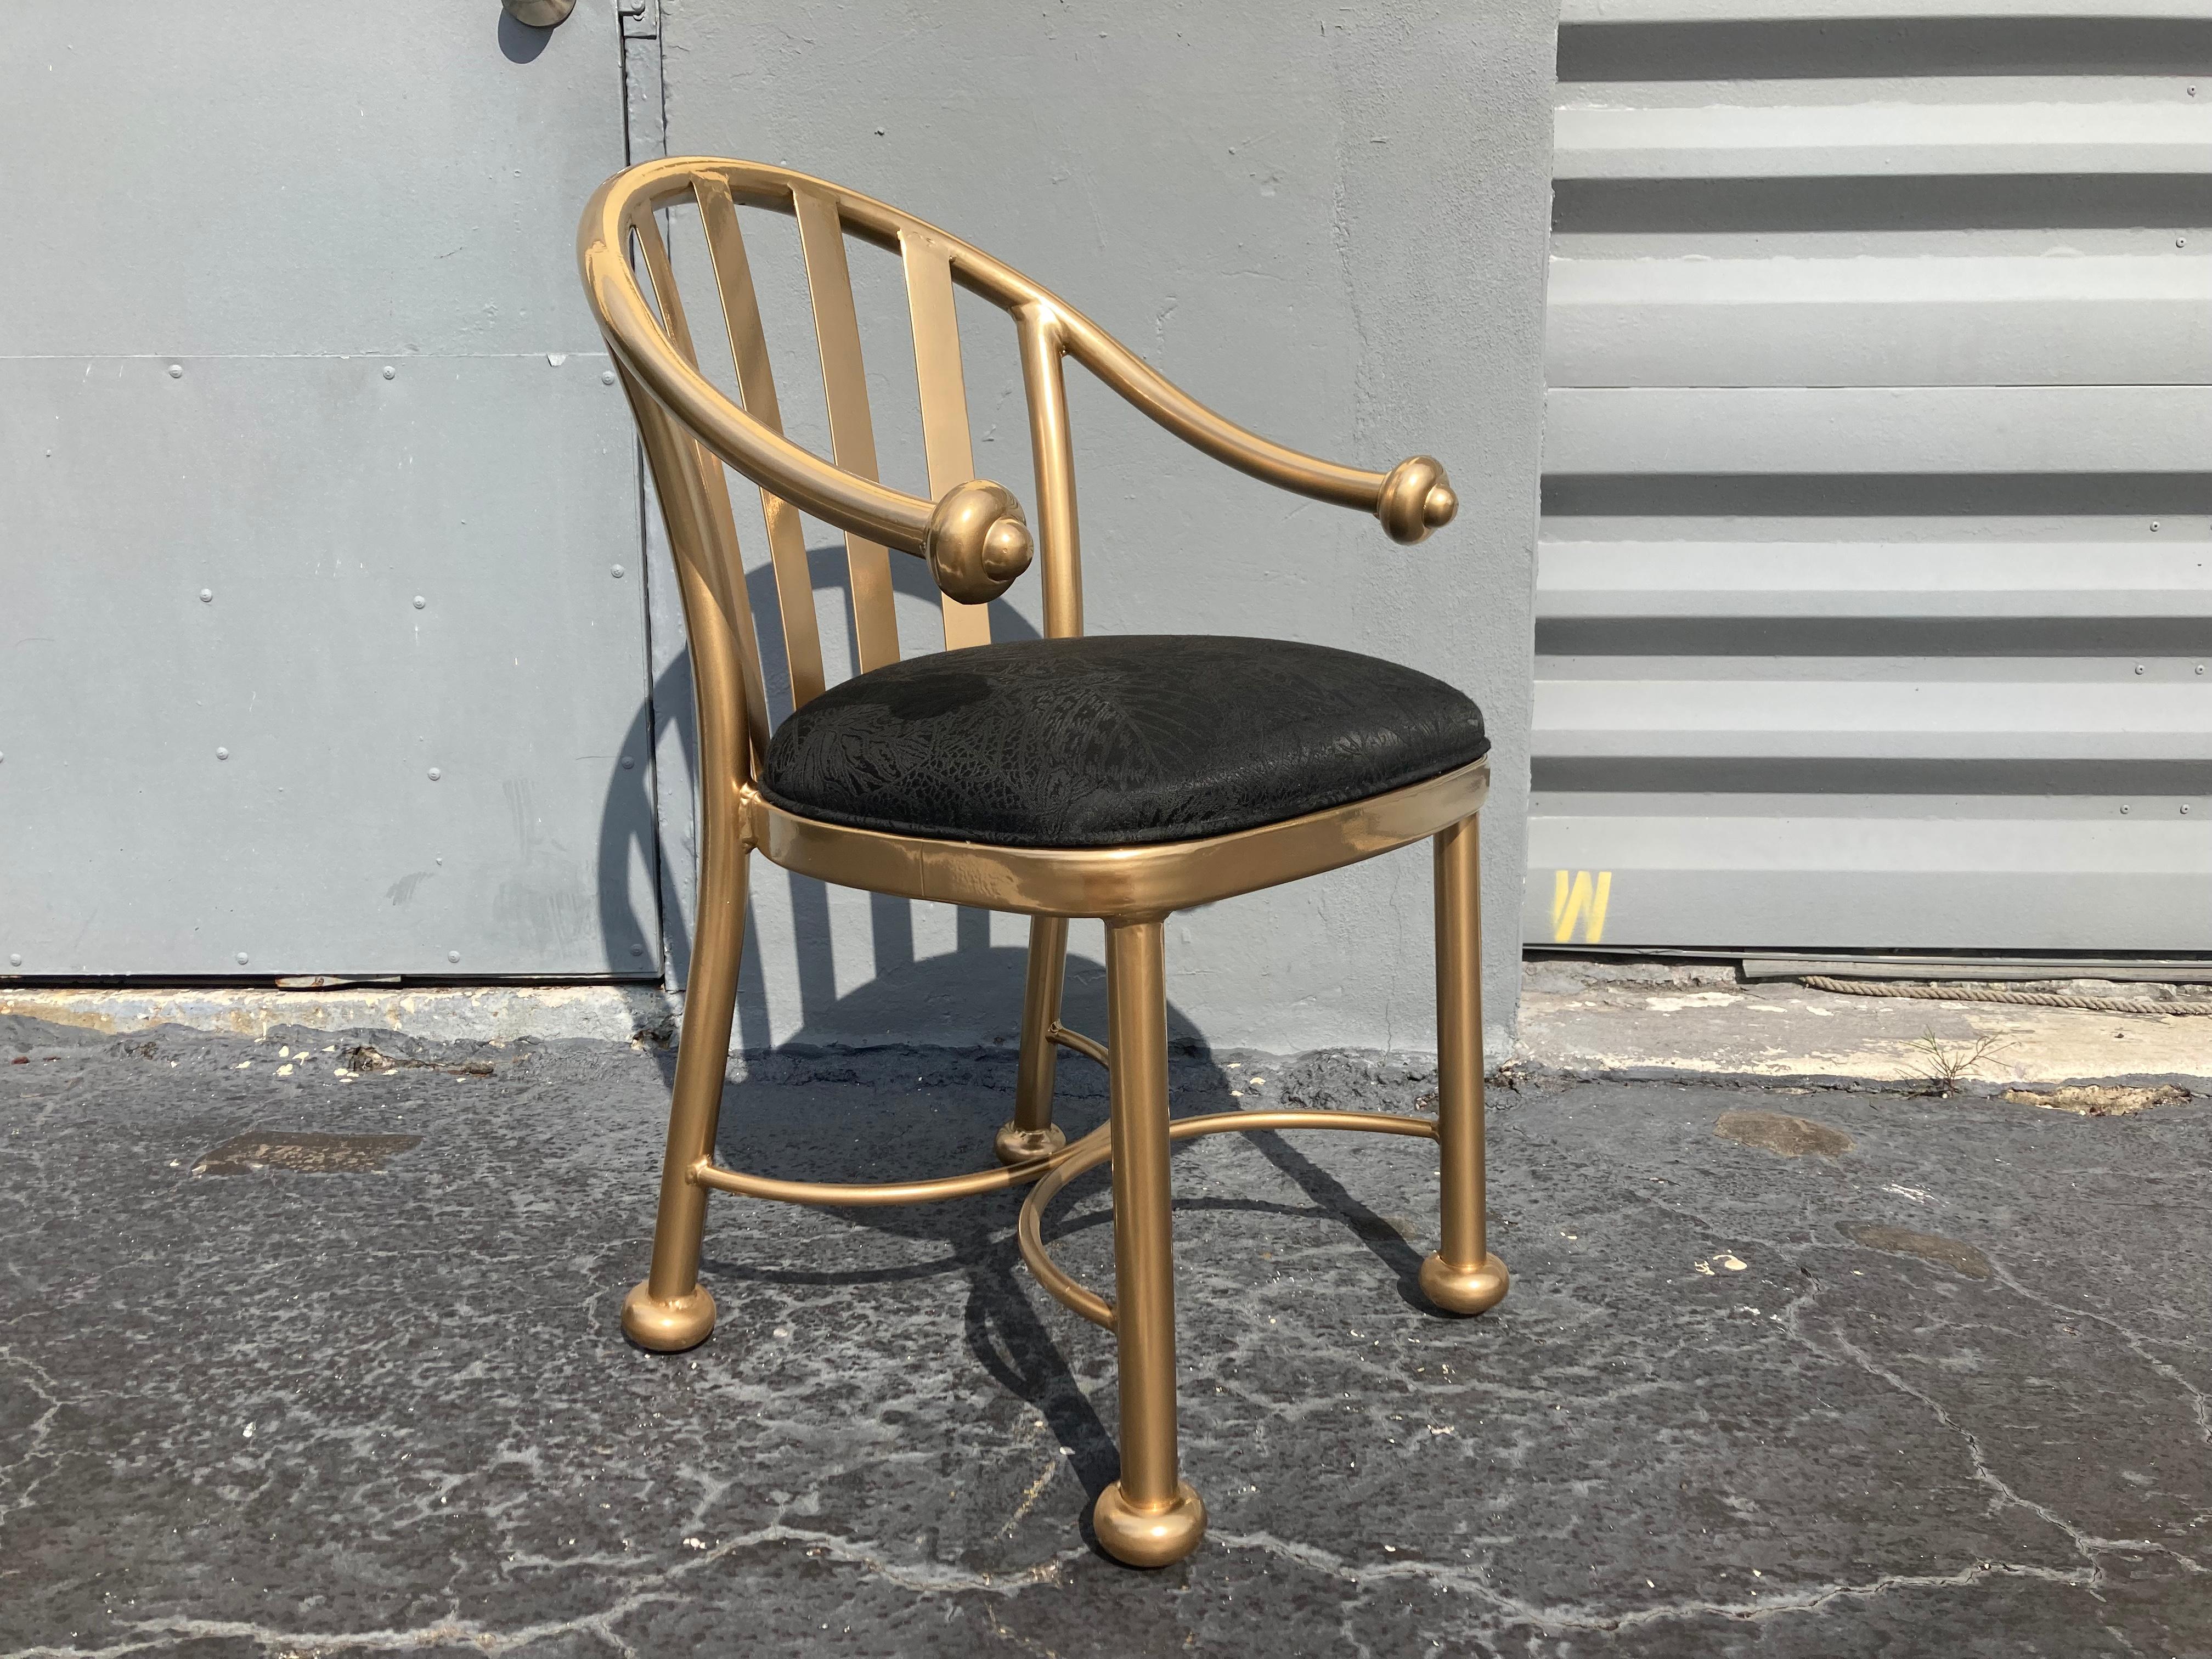 Set of twelve dining chairs, gold painted aluminum frames with fabric seats. Finish has almost a polished brass look. Front arm height is about 24”.